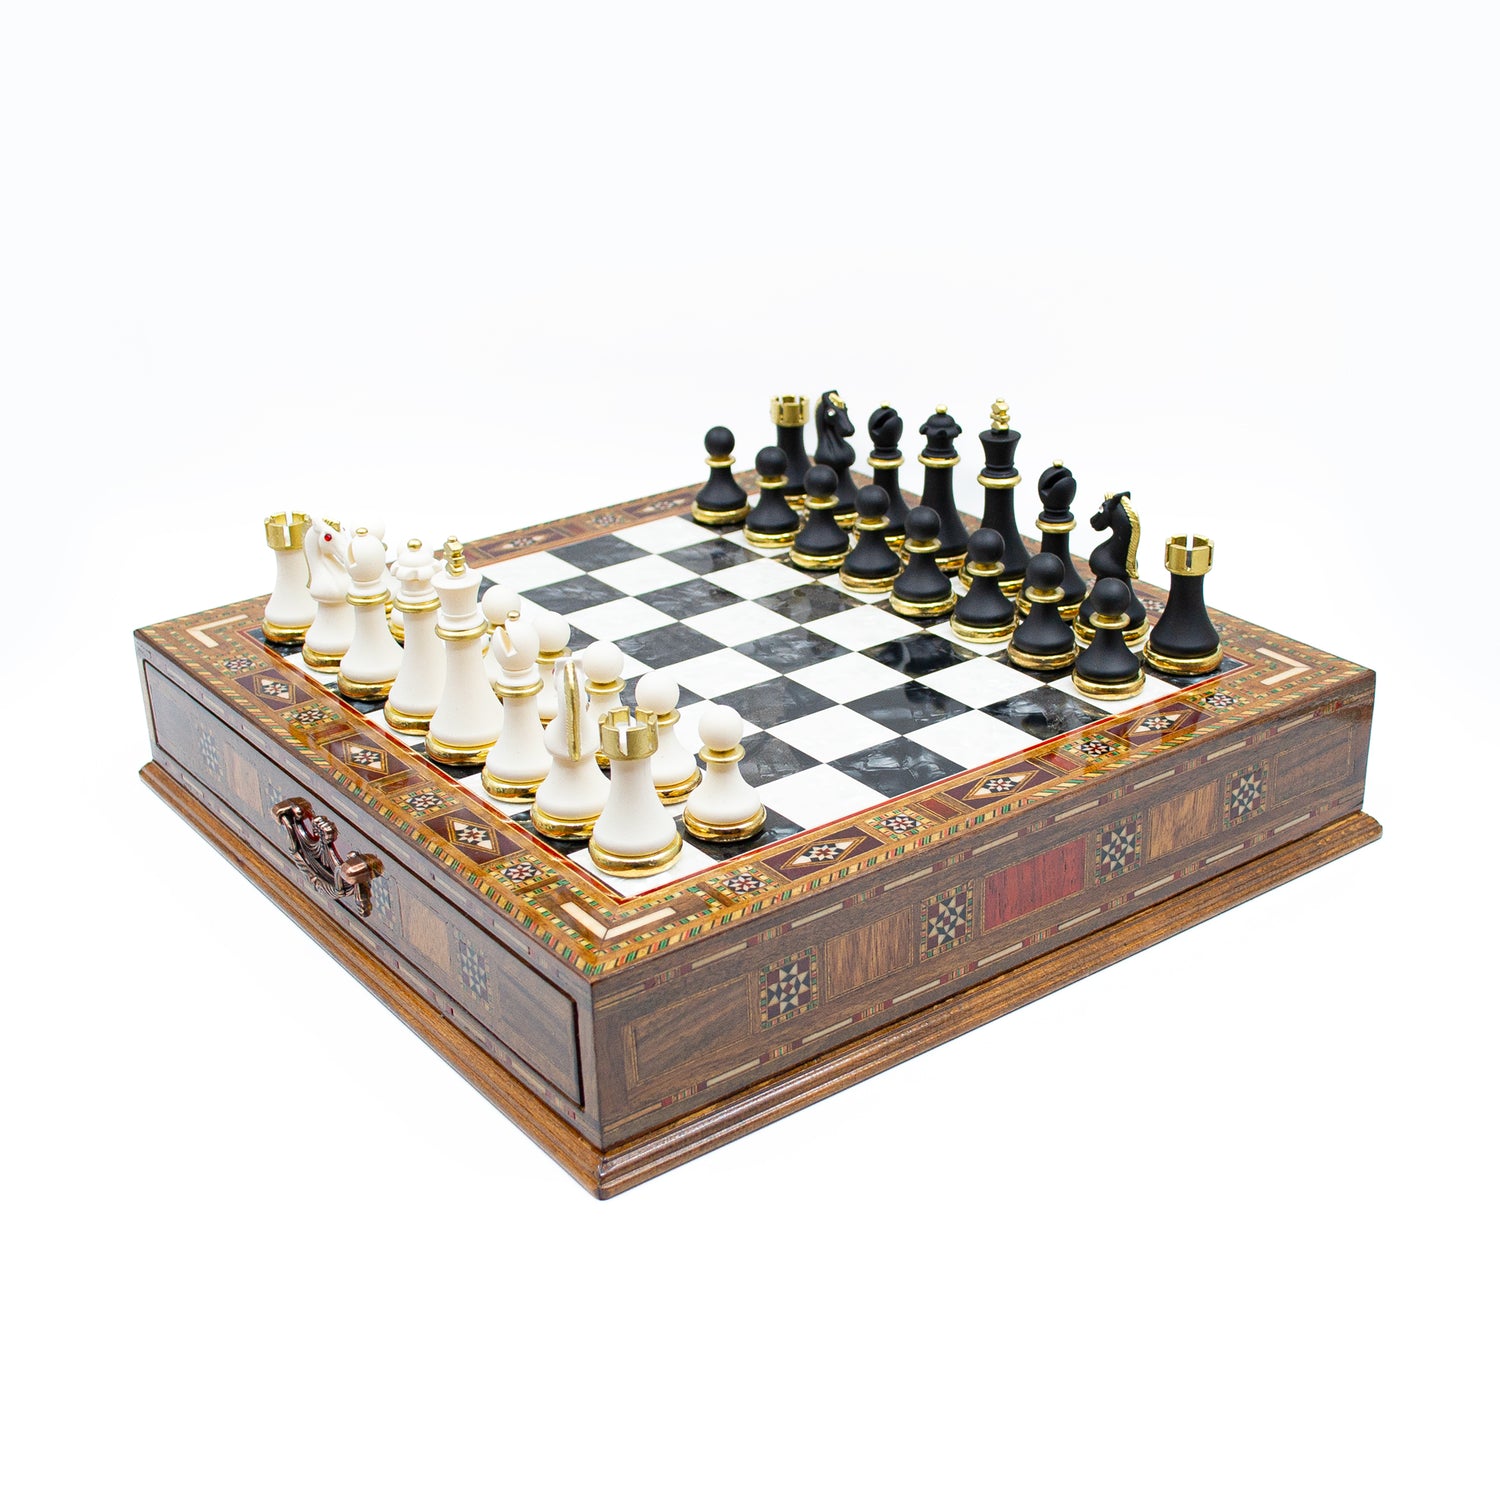 Unique Wooden Chess Set: Black & Silver with Drawer - Ketohandcraft